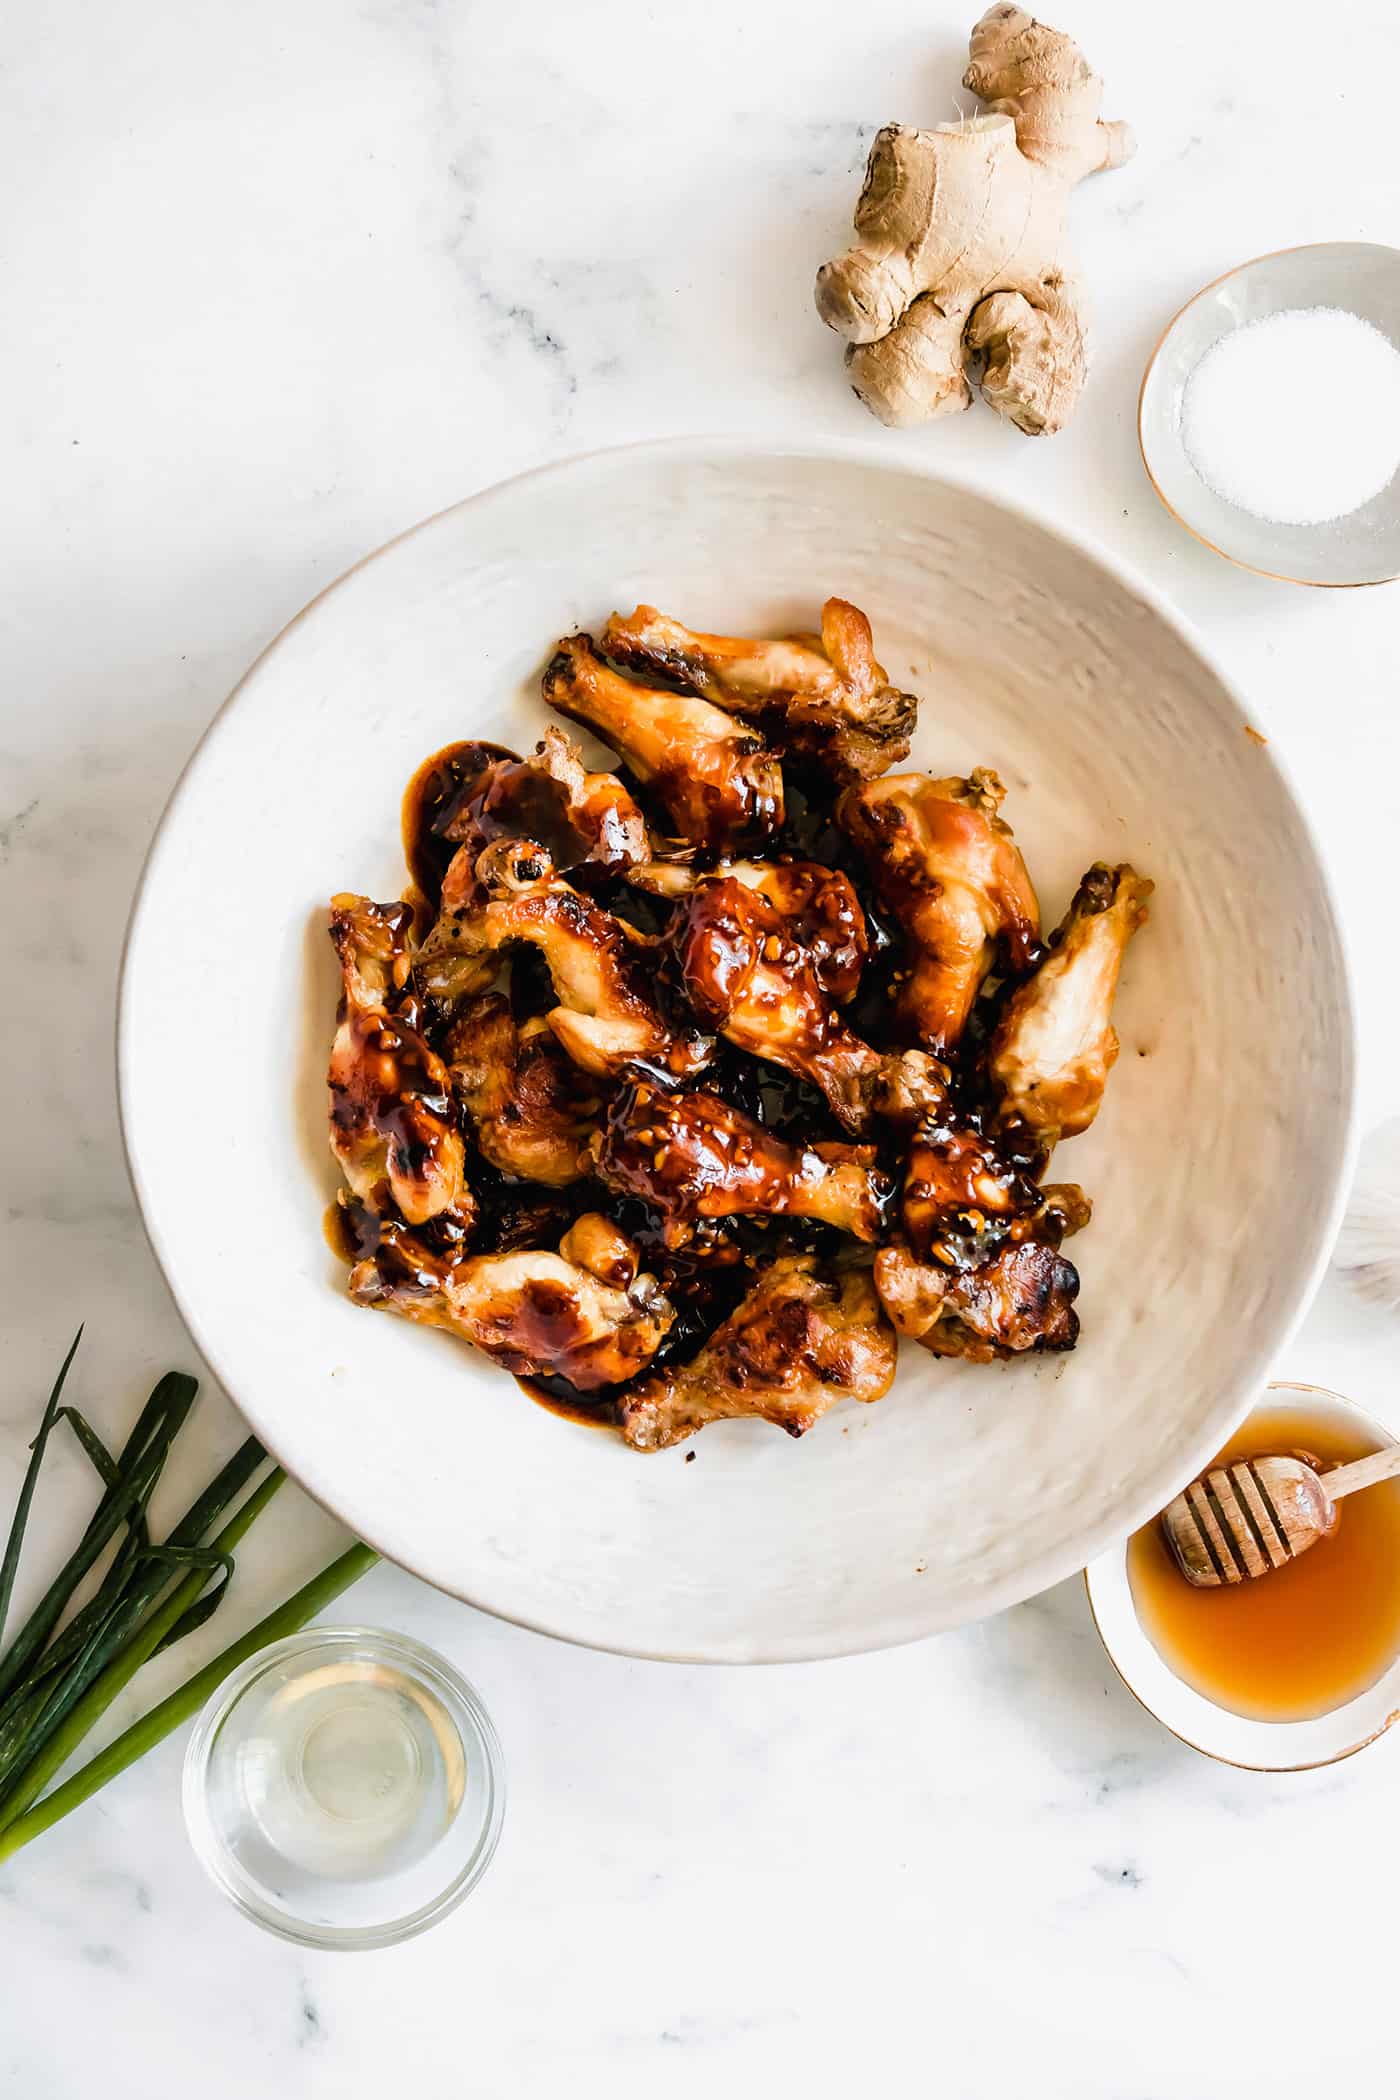 crispy oven baked chicken wings with oyster sauce poured over them